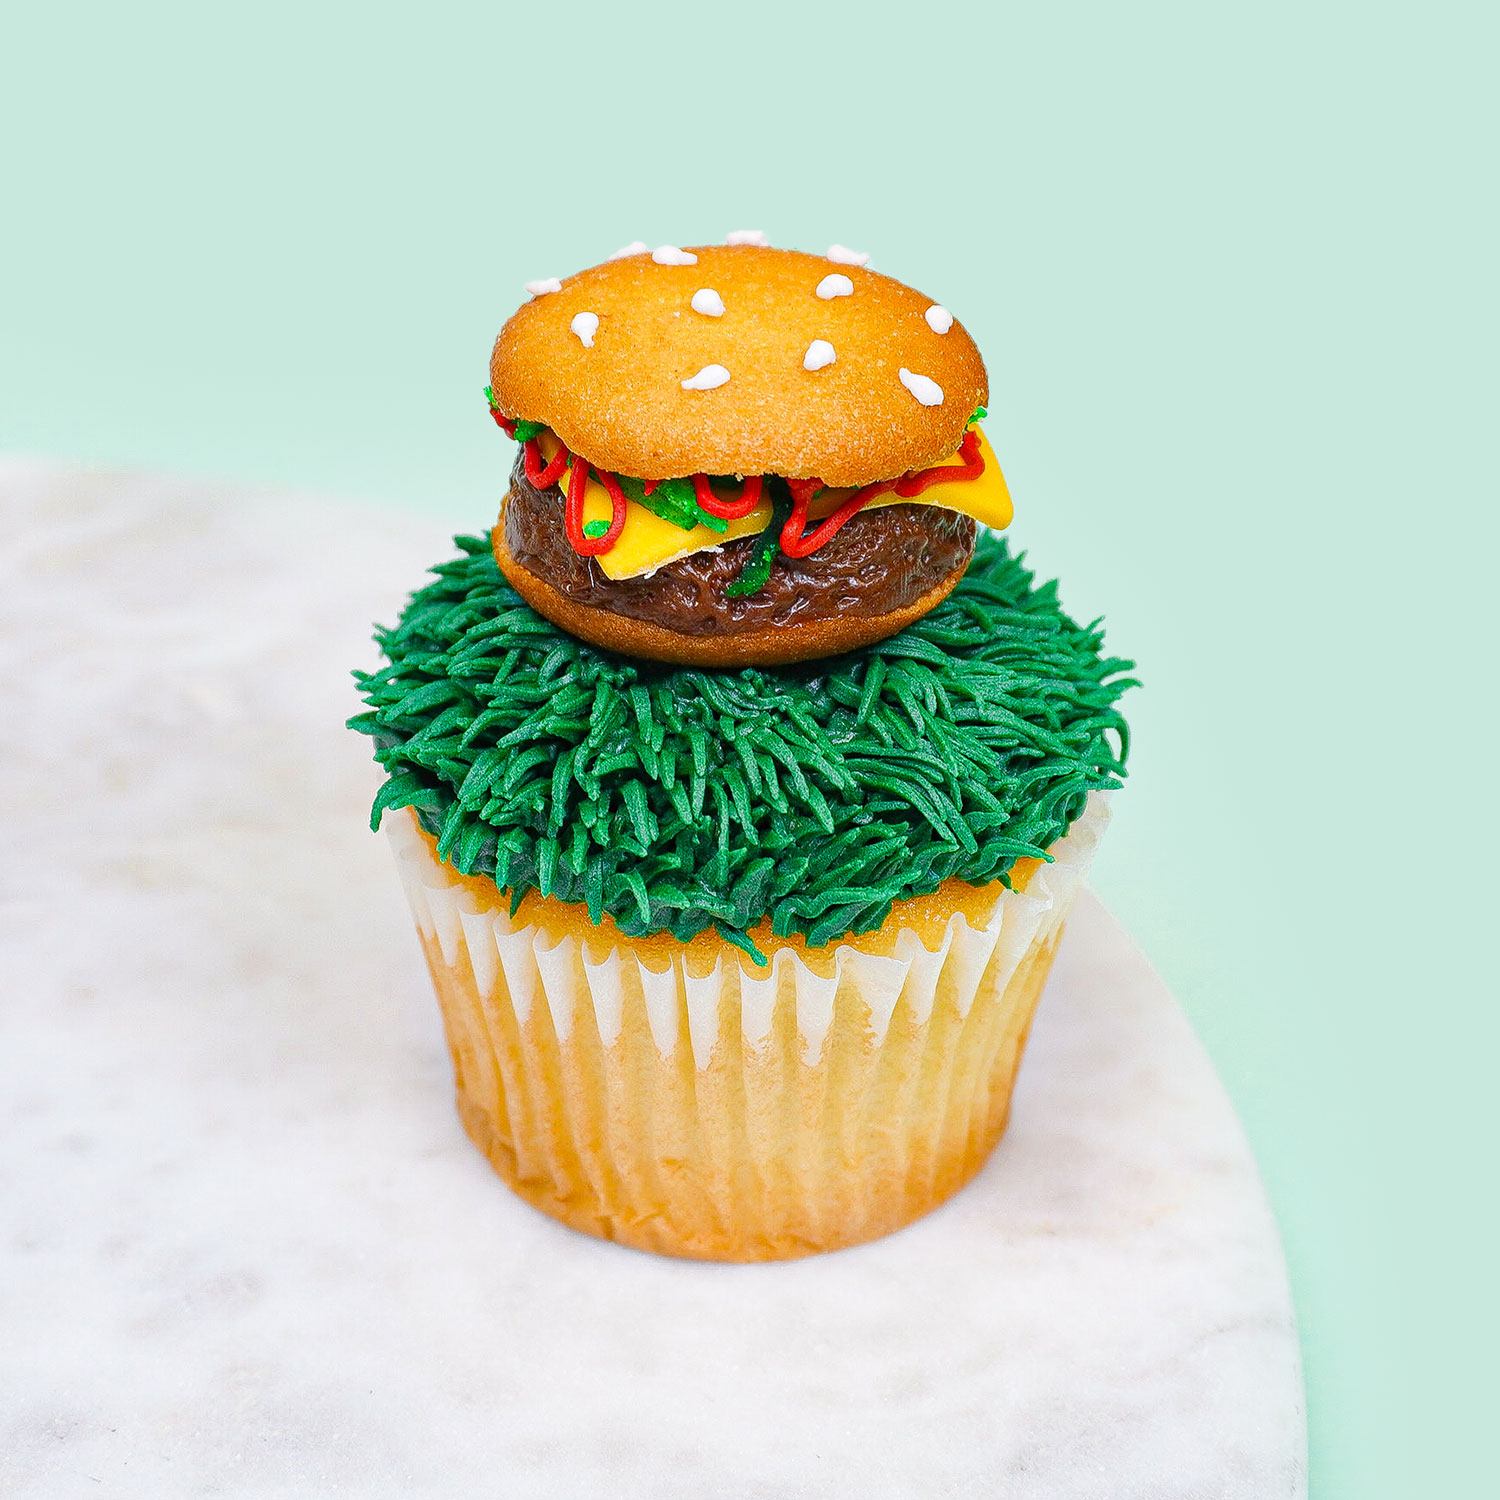 cupcake decorated to look like a burger sitting on grass